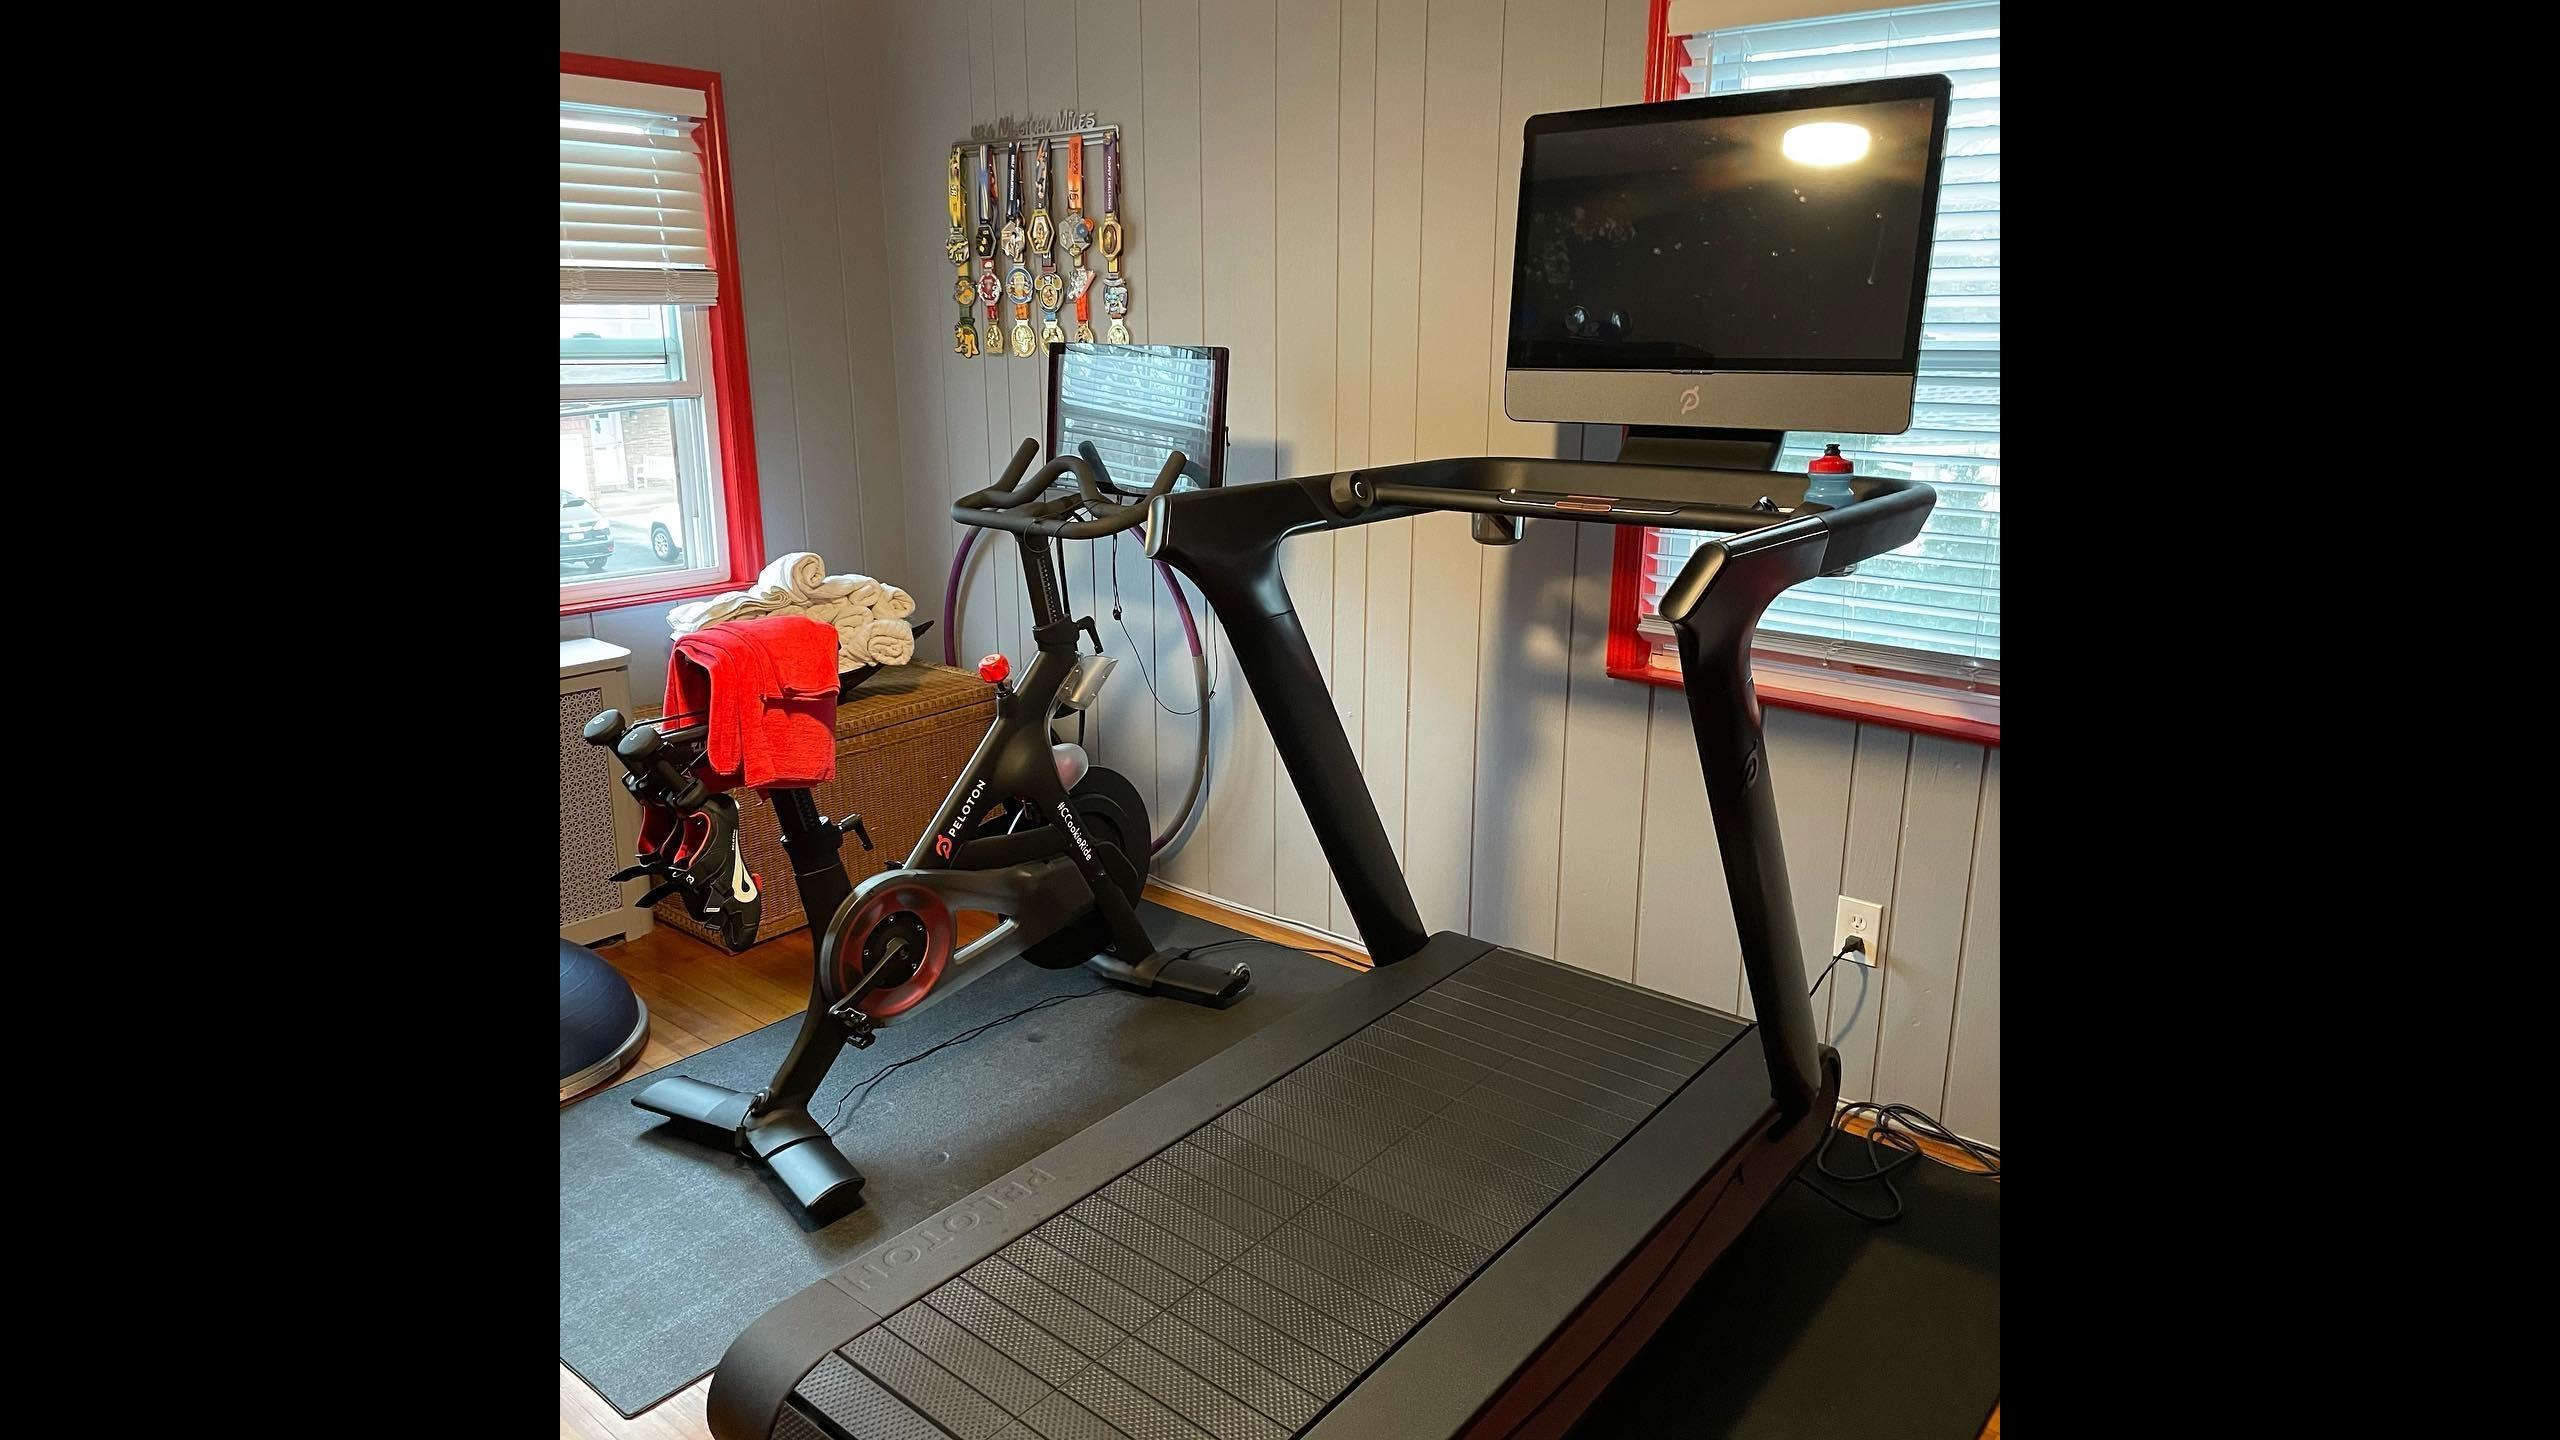 Exercise equipment company Peloton is recalling its treadmills after reports of injuries and the death of at least one child. (Peloton / Facebook)